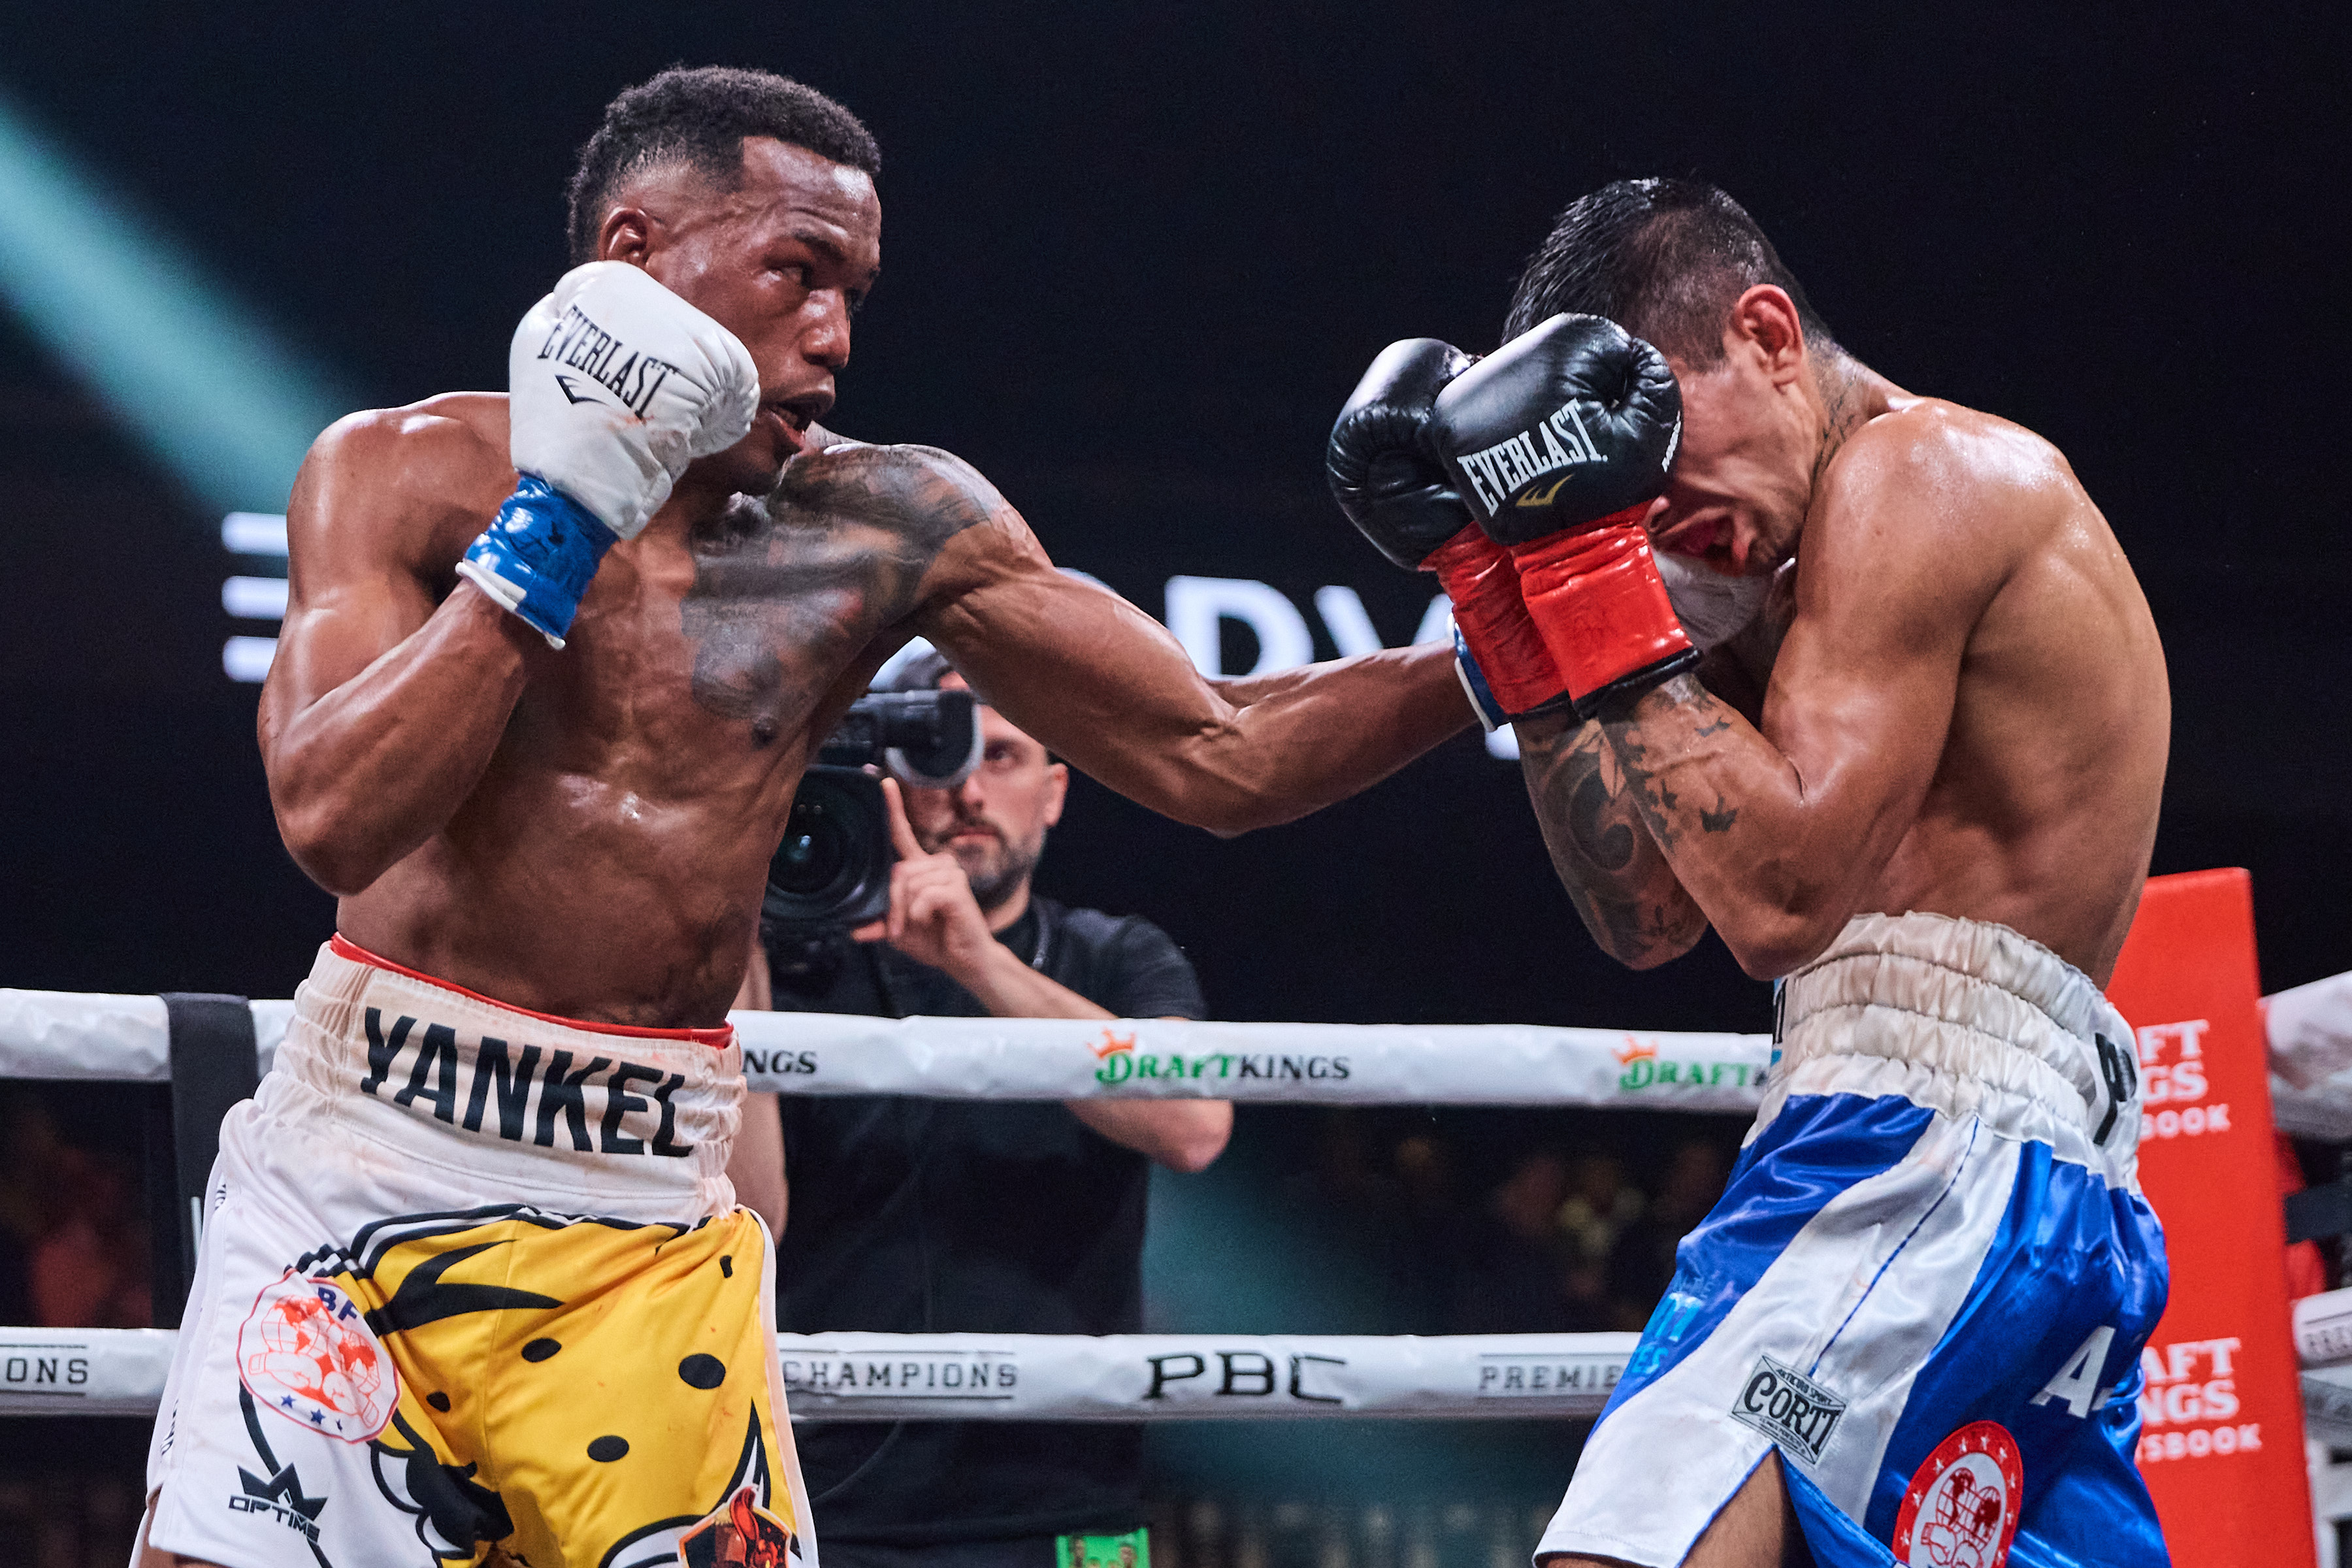 Subriel Matias is now the IBF 140 lb champion after stopping Jeremias Ponce